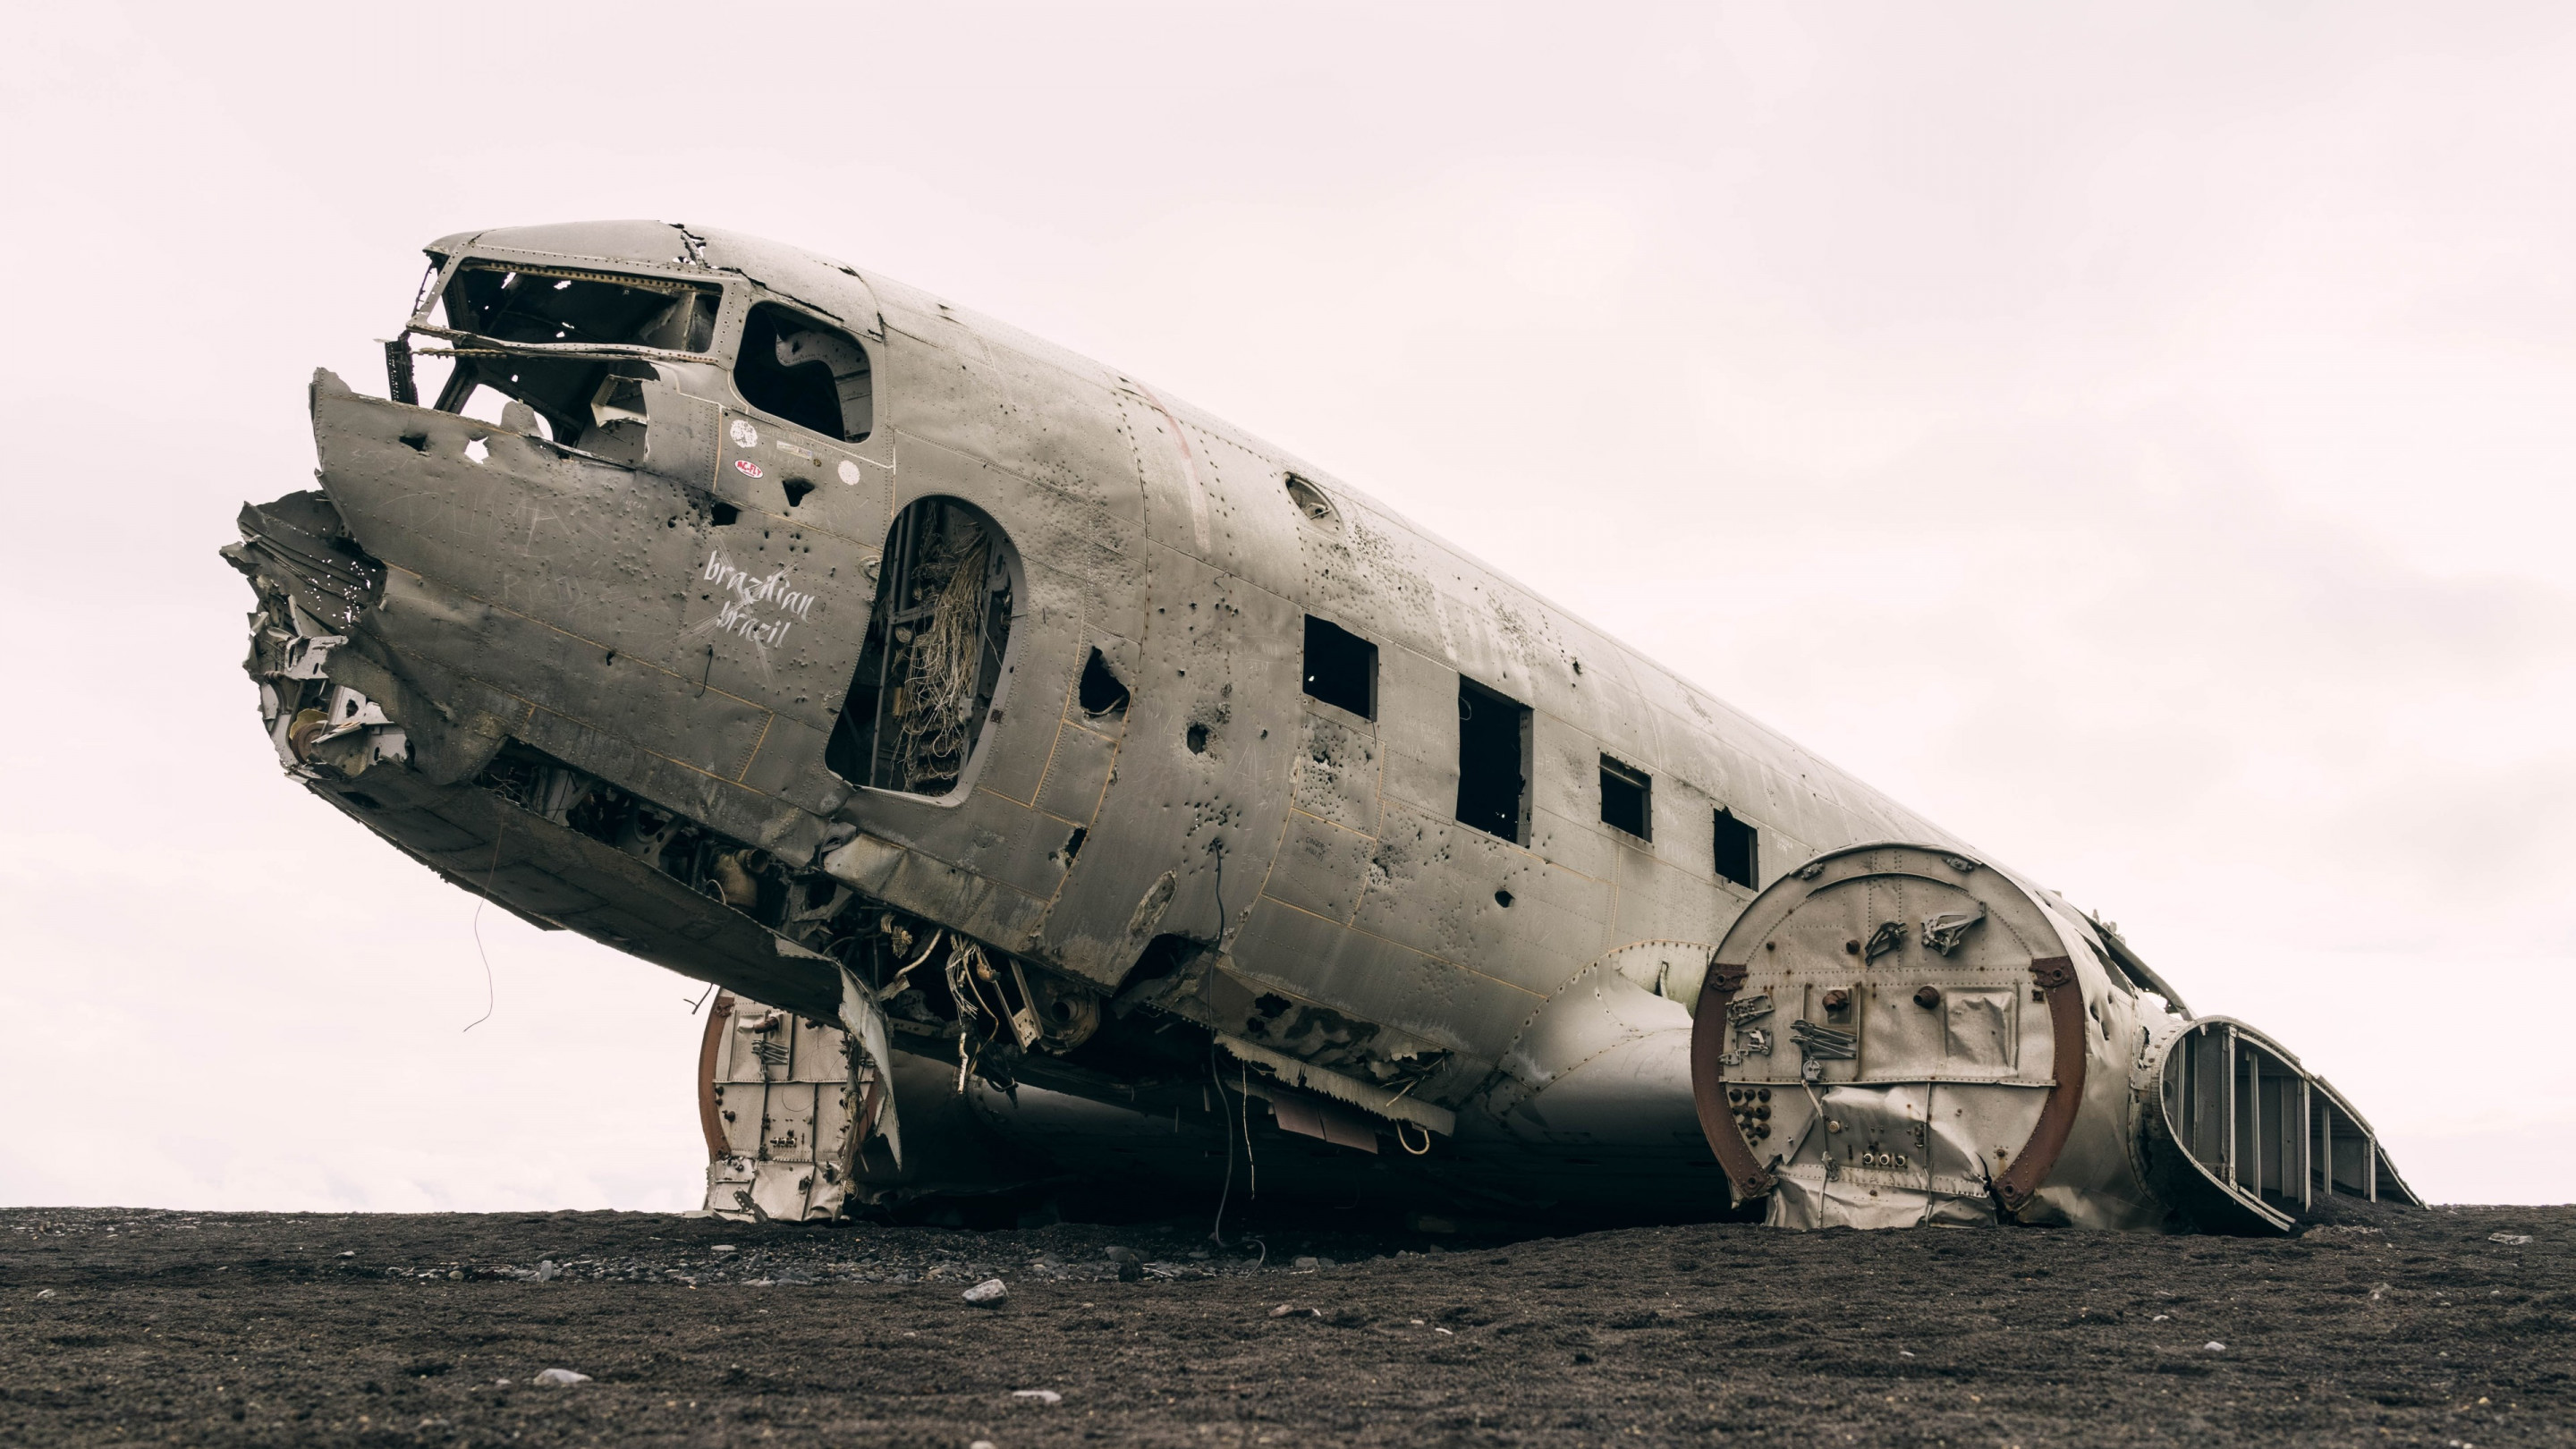 Wrecked airplane wallpaper 2880x1620